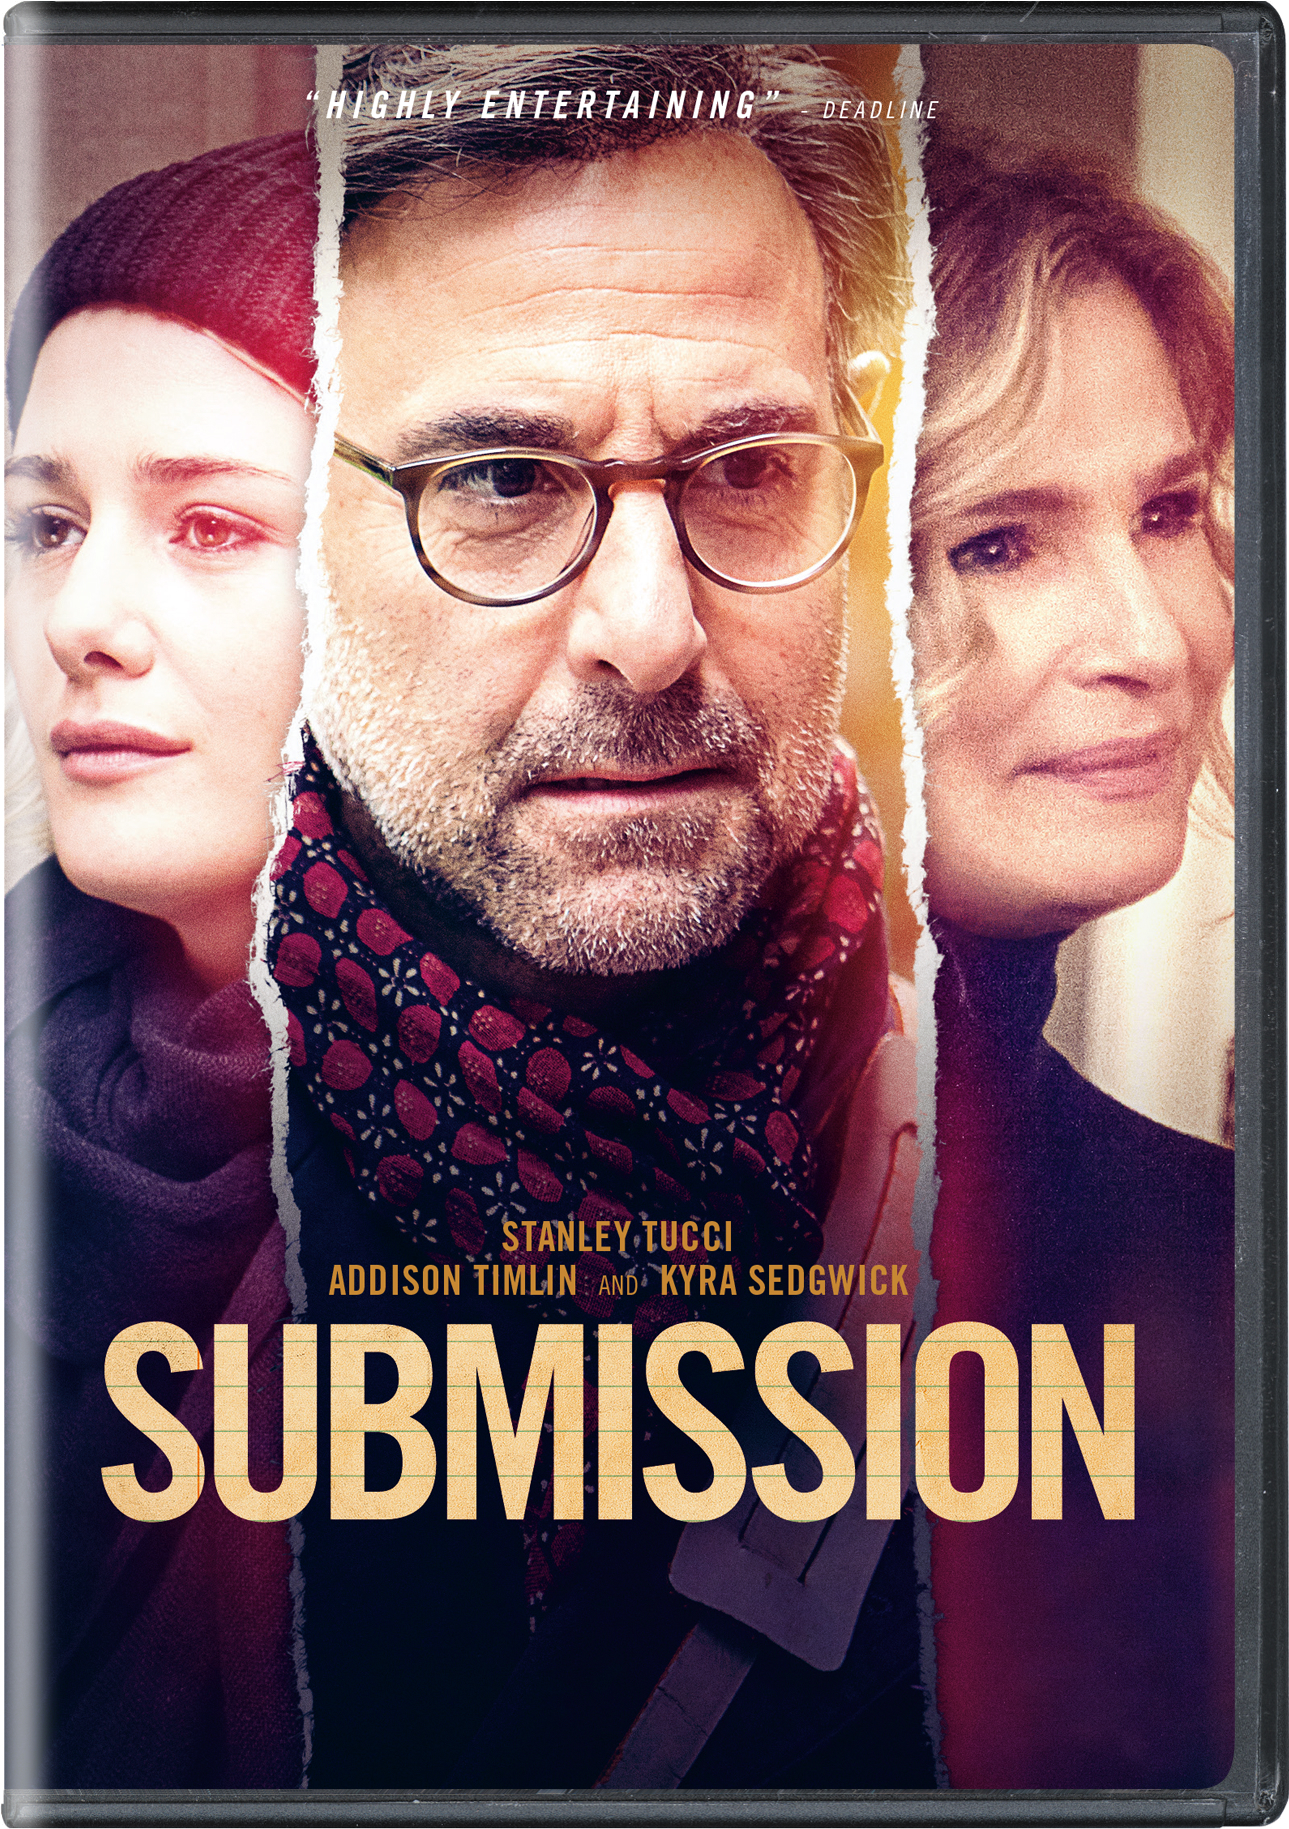 Submission - DVD [ 2018 ]  - Drama Movies On DVD - Movies On GRUV